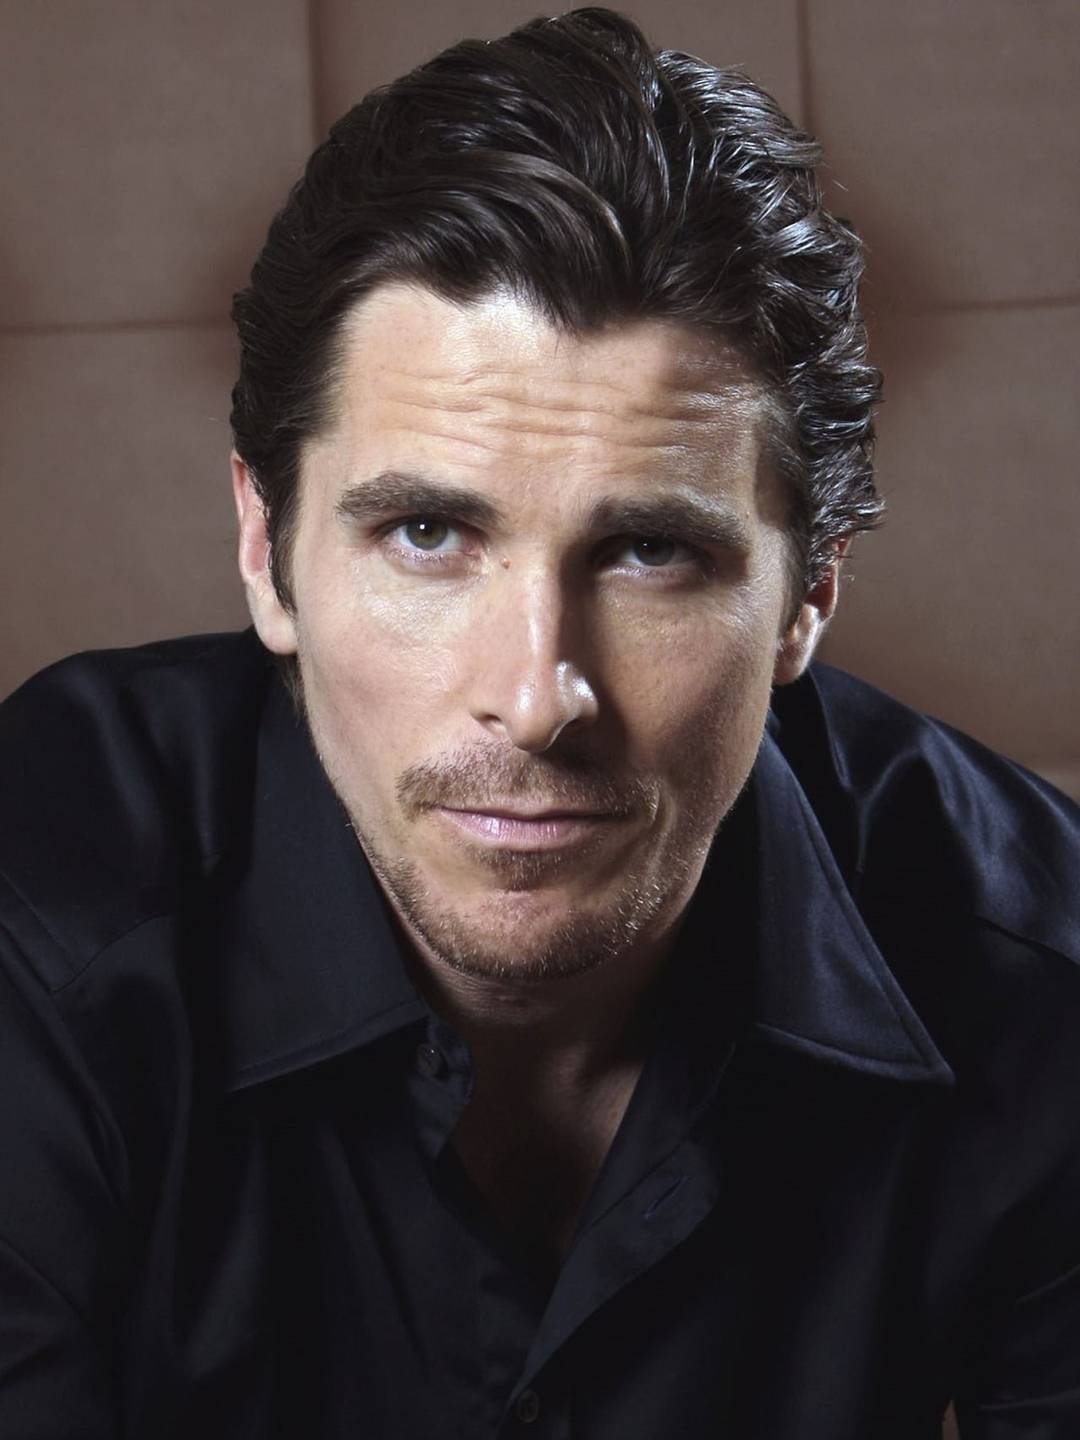 Christian Bale who are his parents